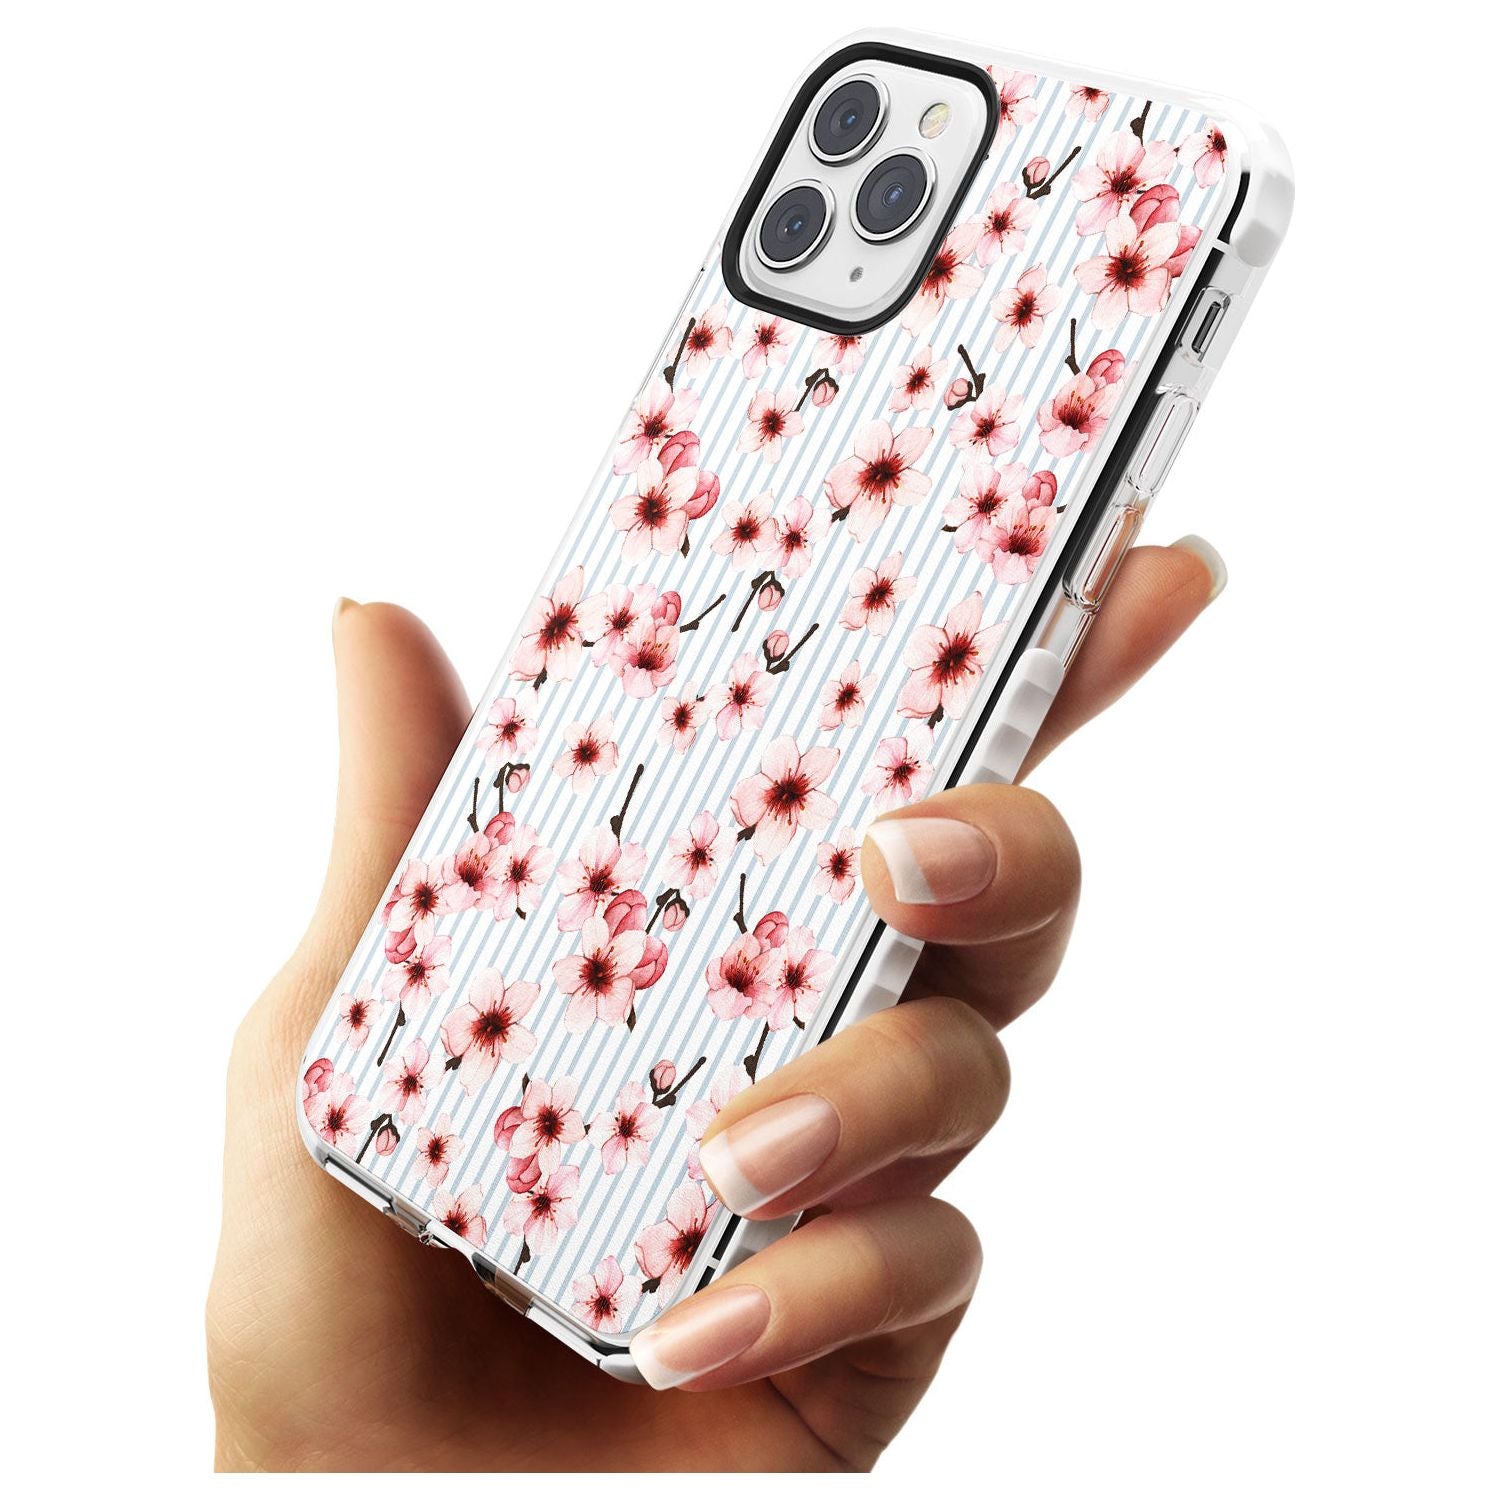 Cherry Blossoms on Blue Stripes Pattern Impact Phone Case for iPhone 11 Pro Max